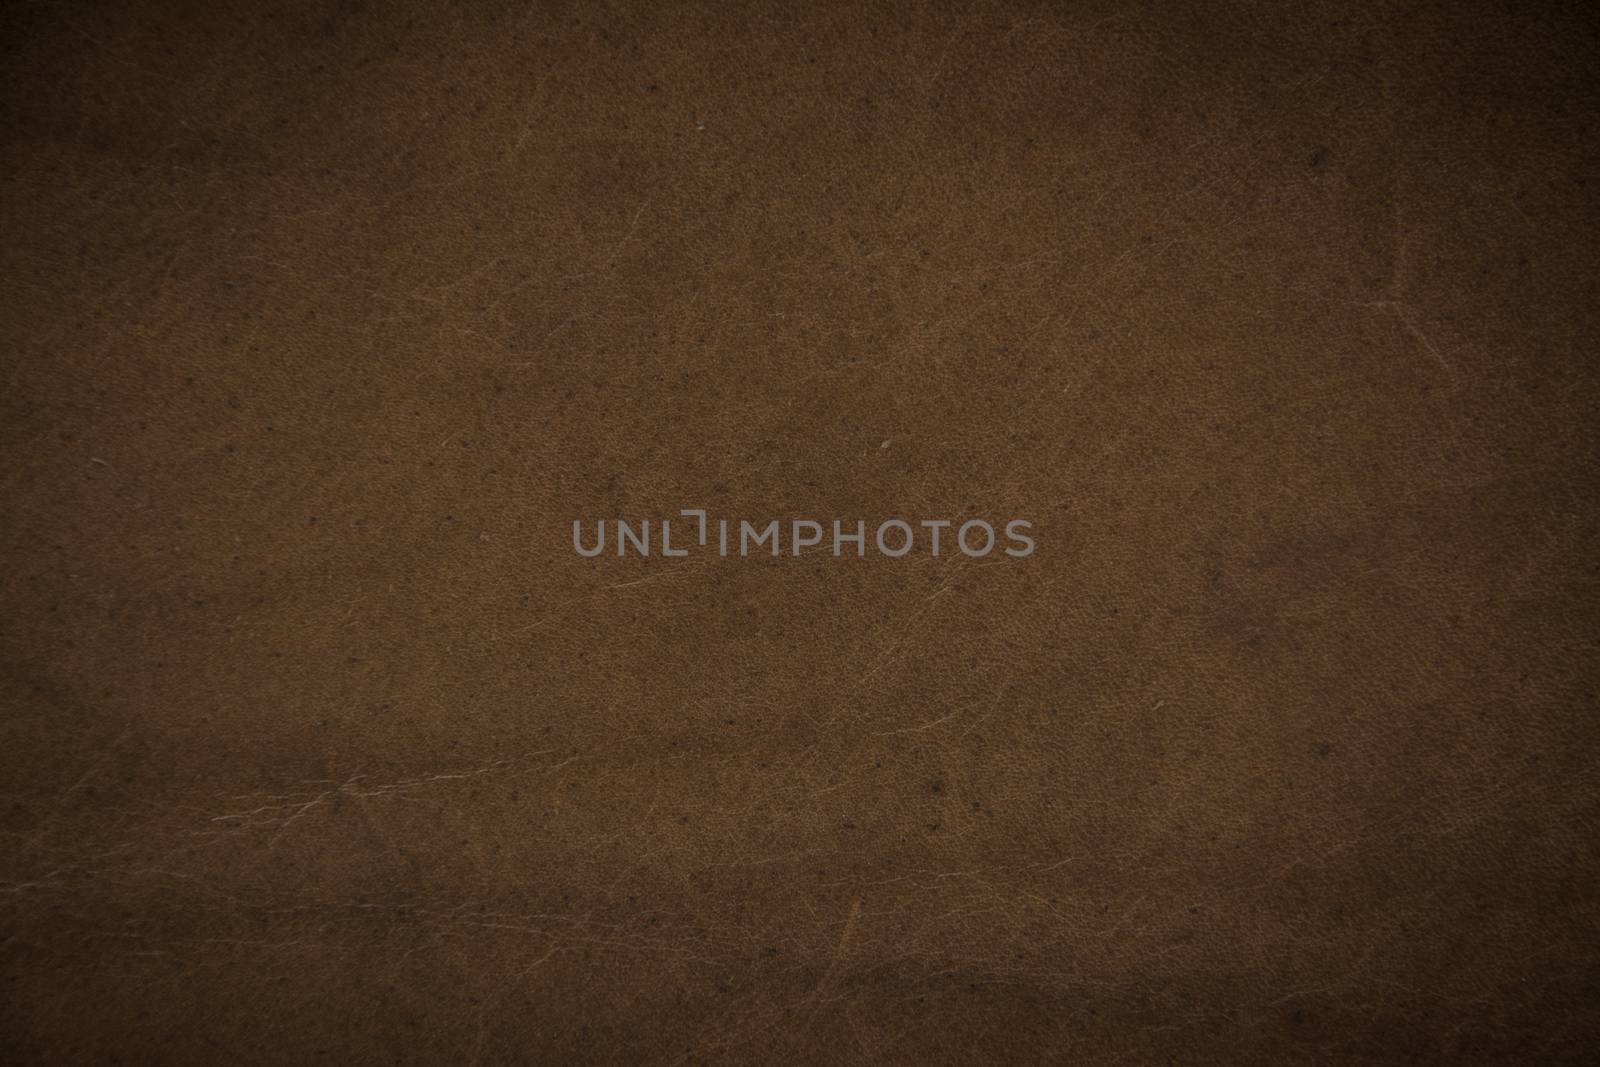  brown leather texture background 